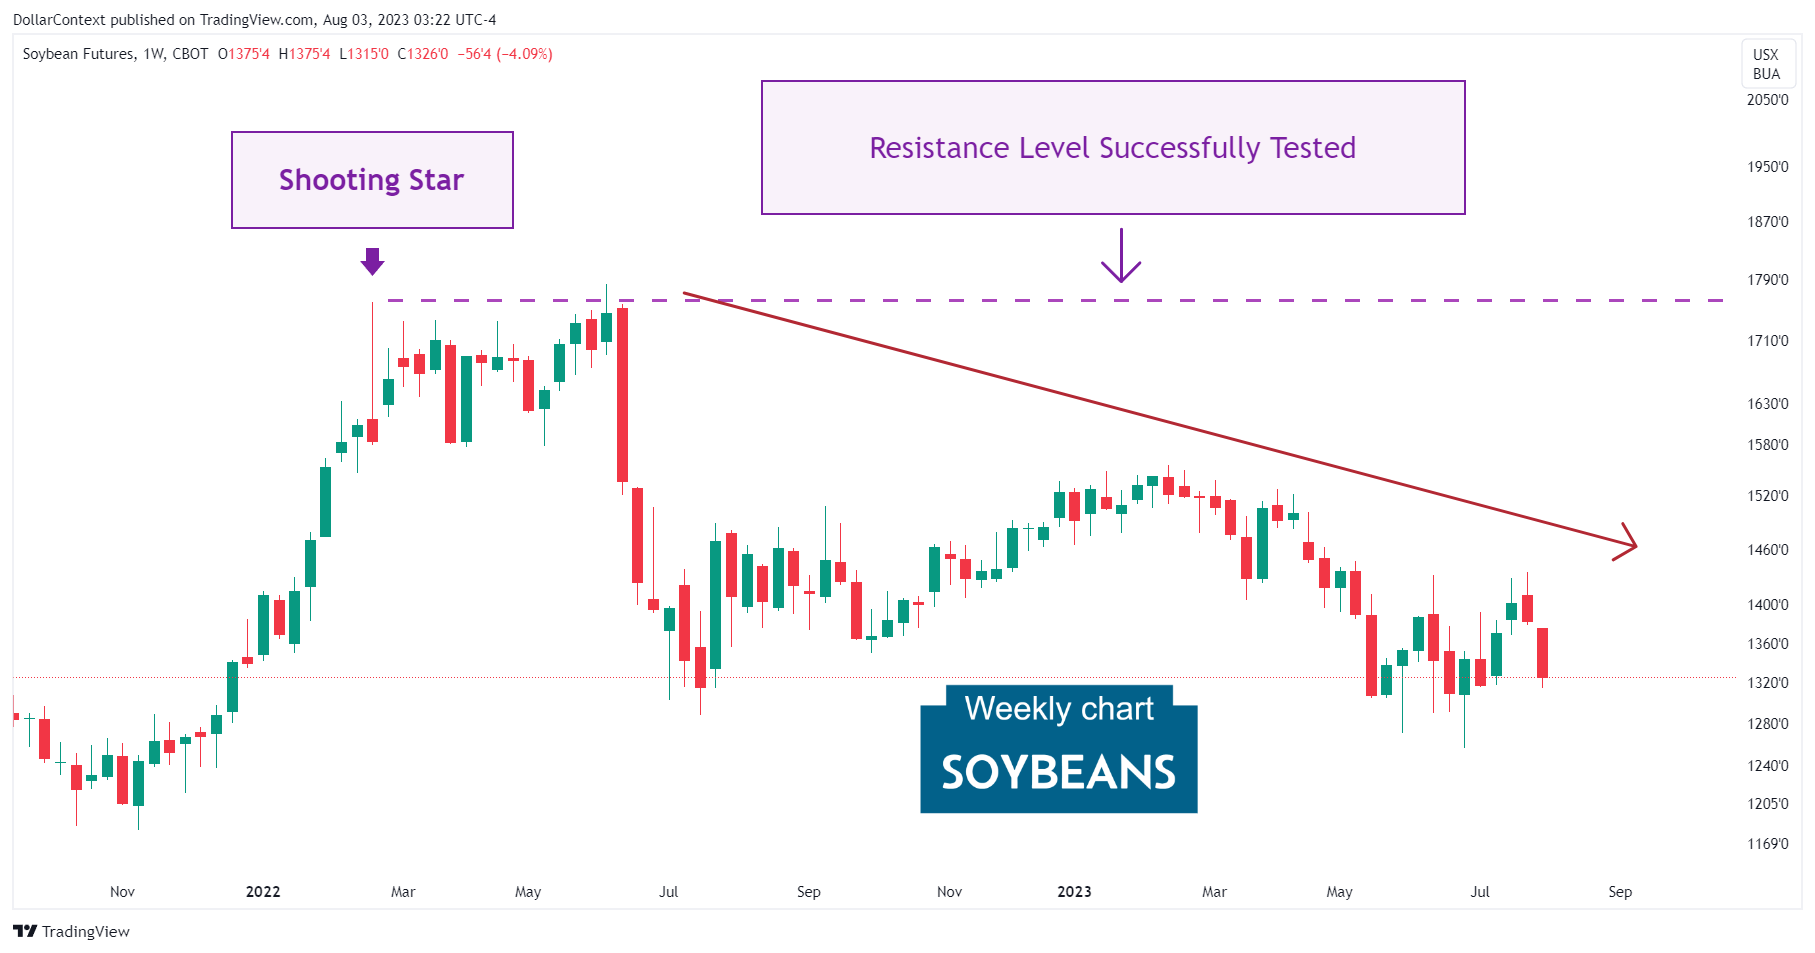 Soybeans: Shooting Star Defines Resistance. February 2022 (Weekly Chart)